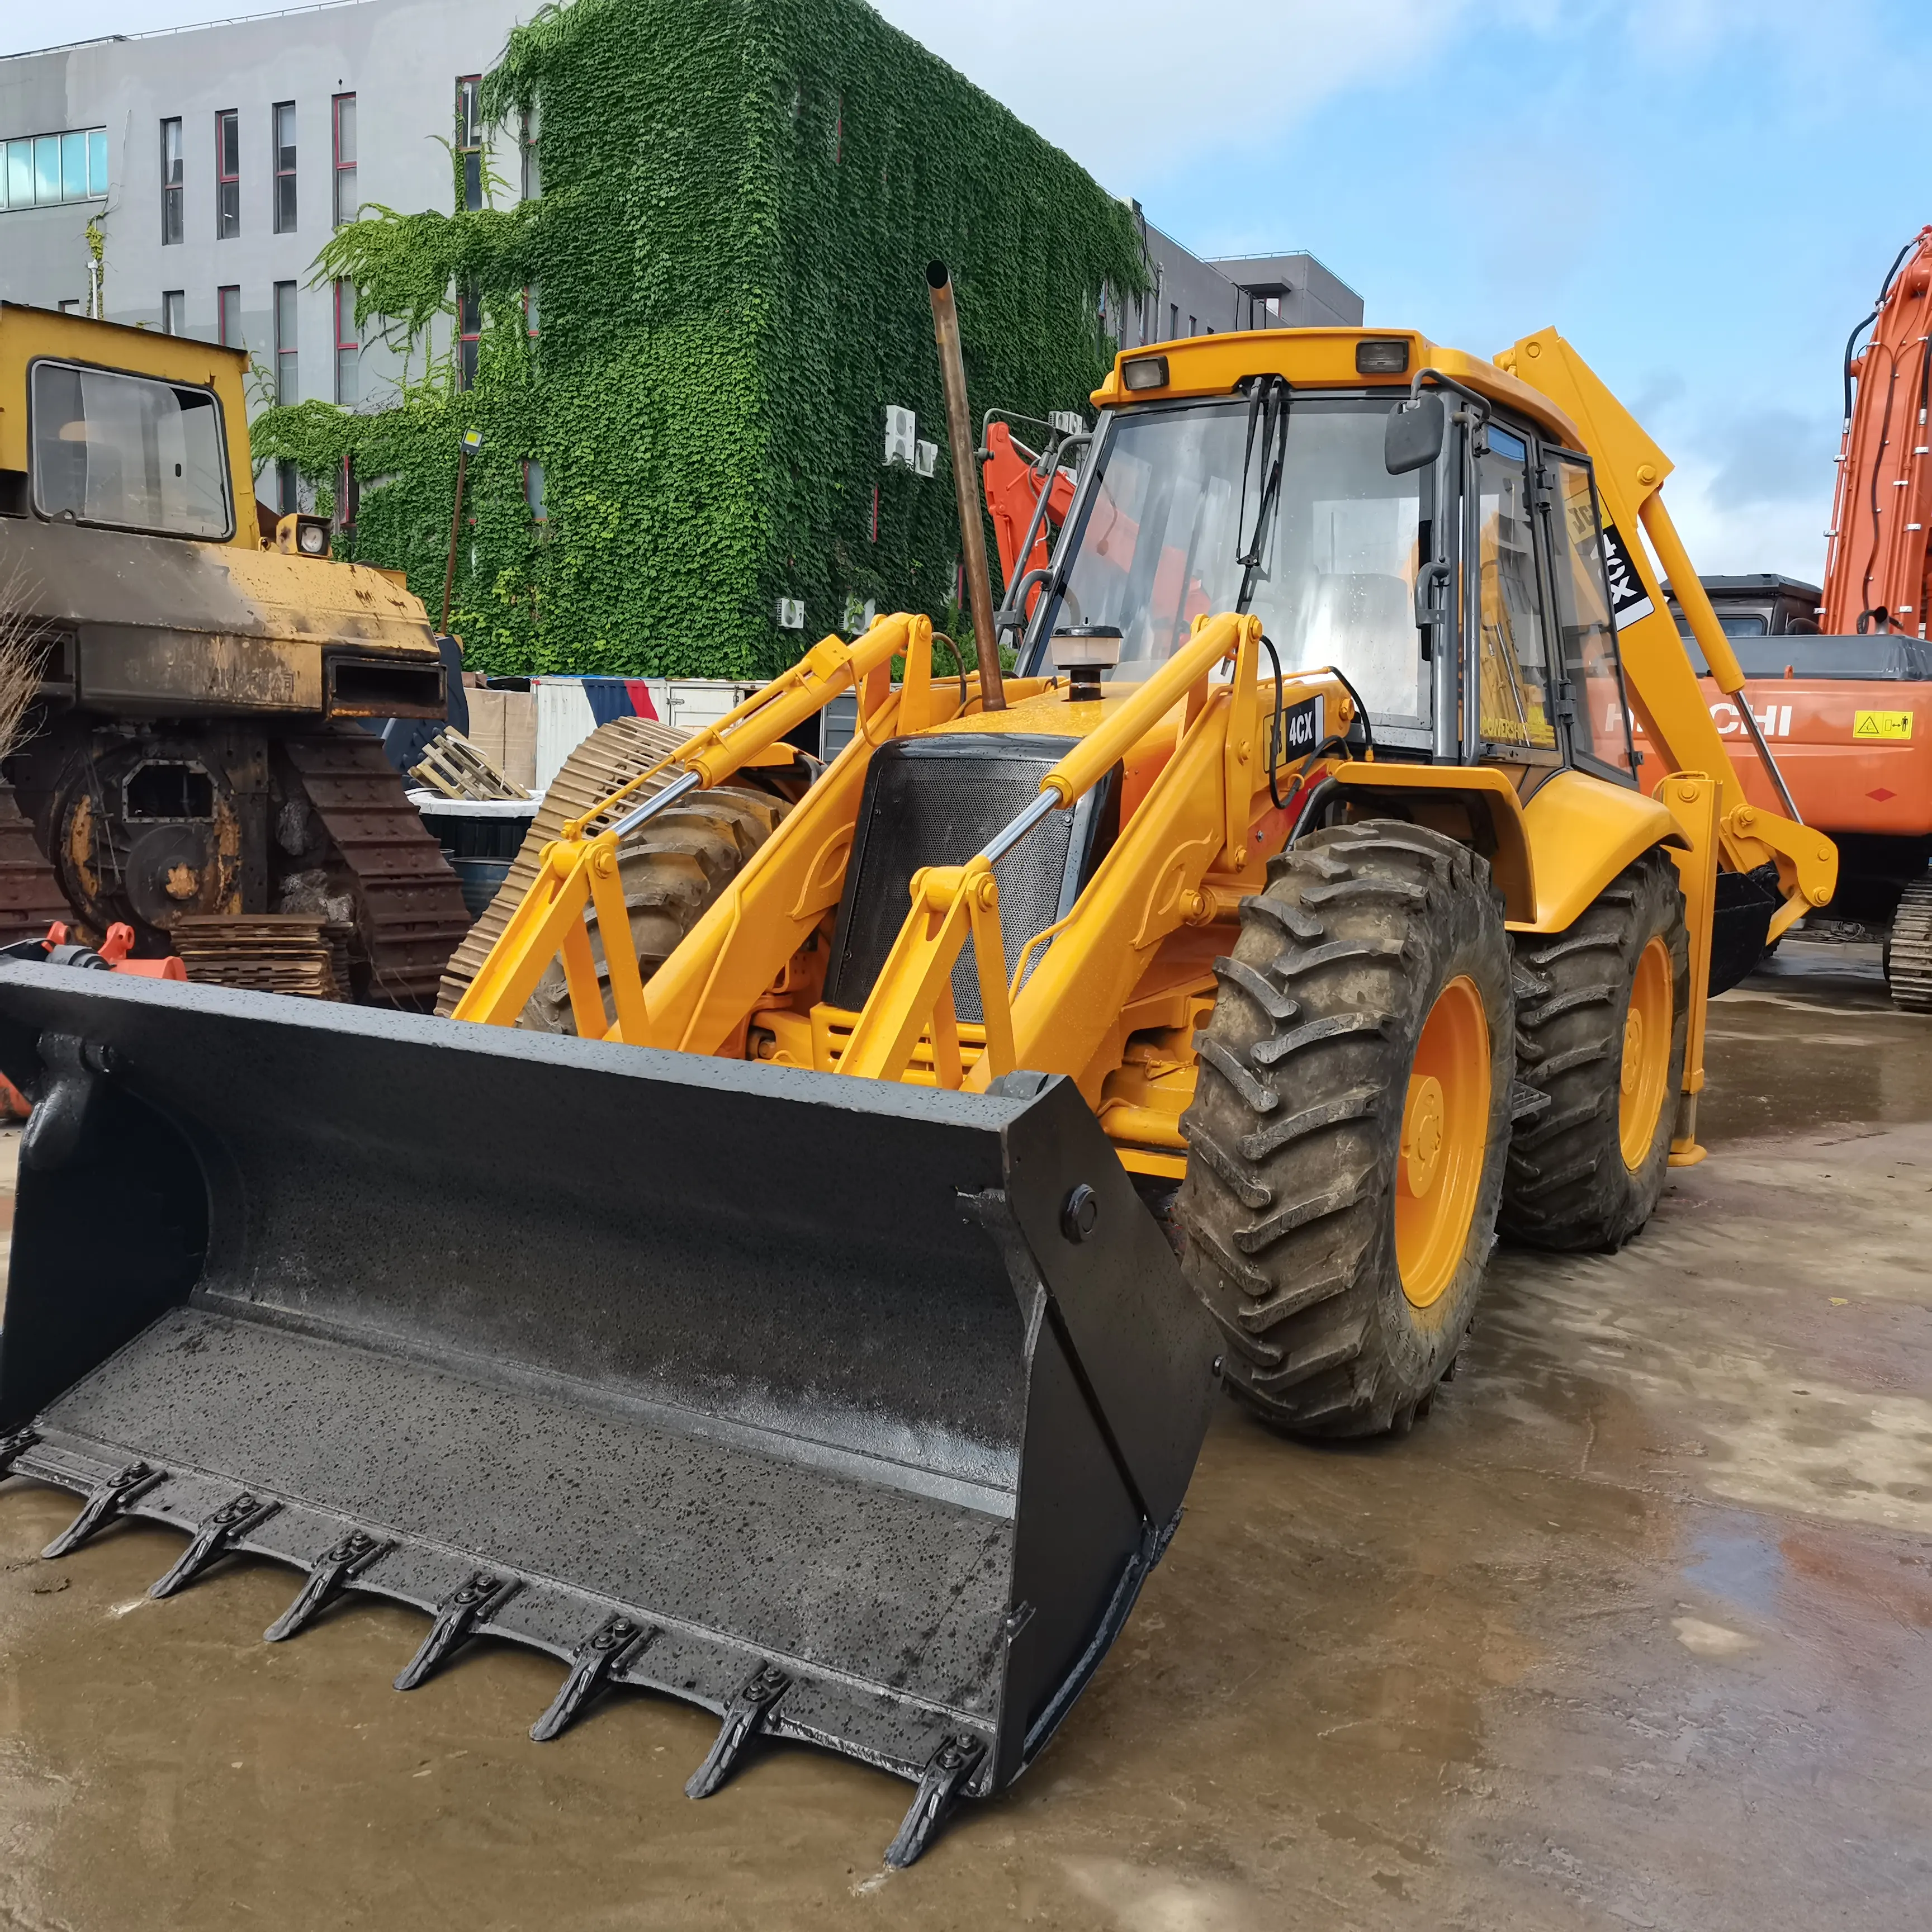 Used backhoe loader cat420E 420f 416e JCB 4CX loader backhoe with 4 in 1 bucket 4x4 and A/C heat pilot controls